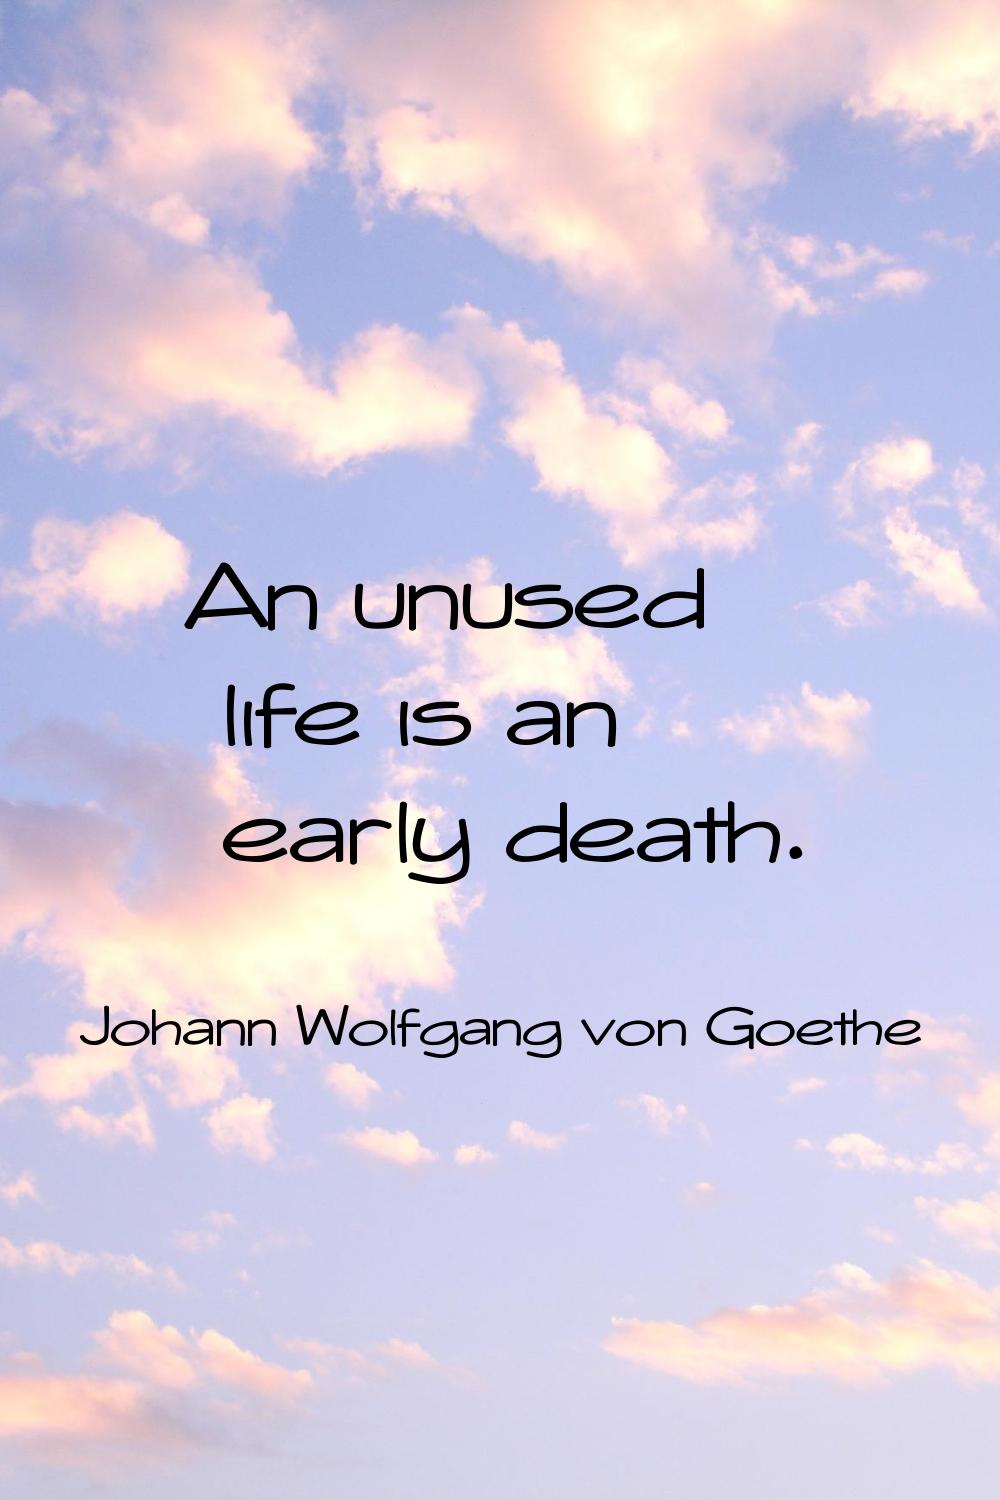 An unused life is an early death.